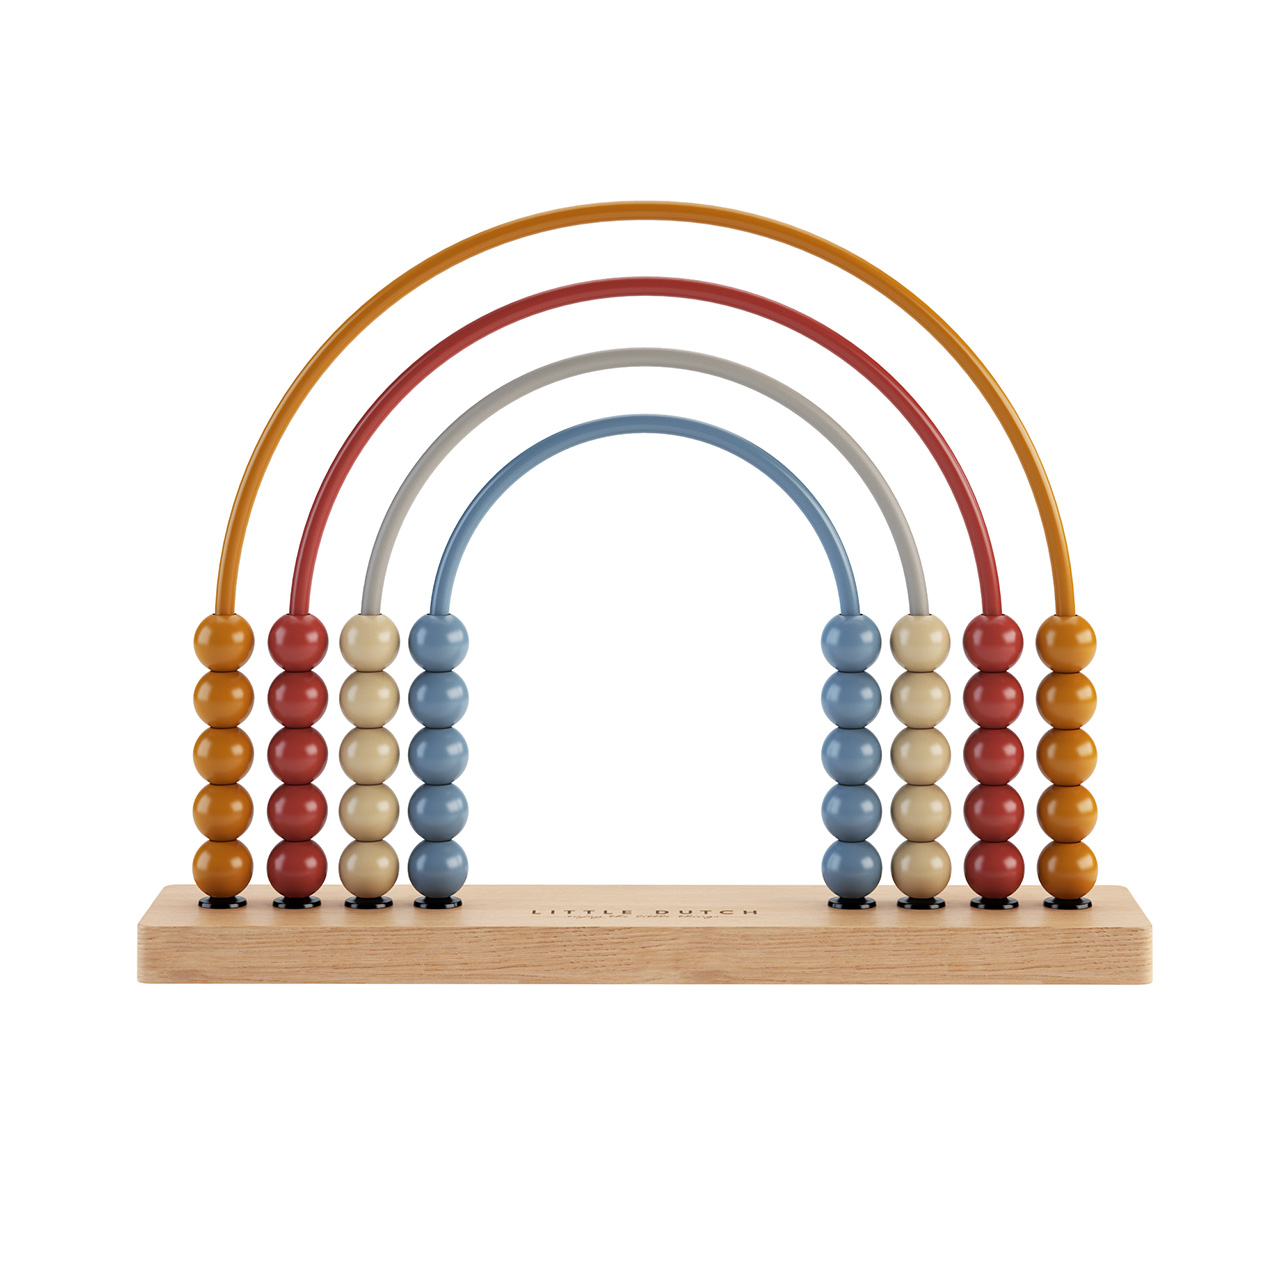 rainbow-abacus-pure-nature-toy-by-little-dutch.jpg